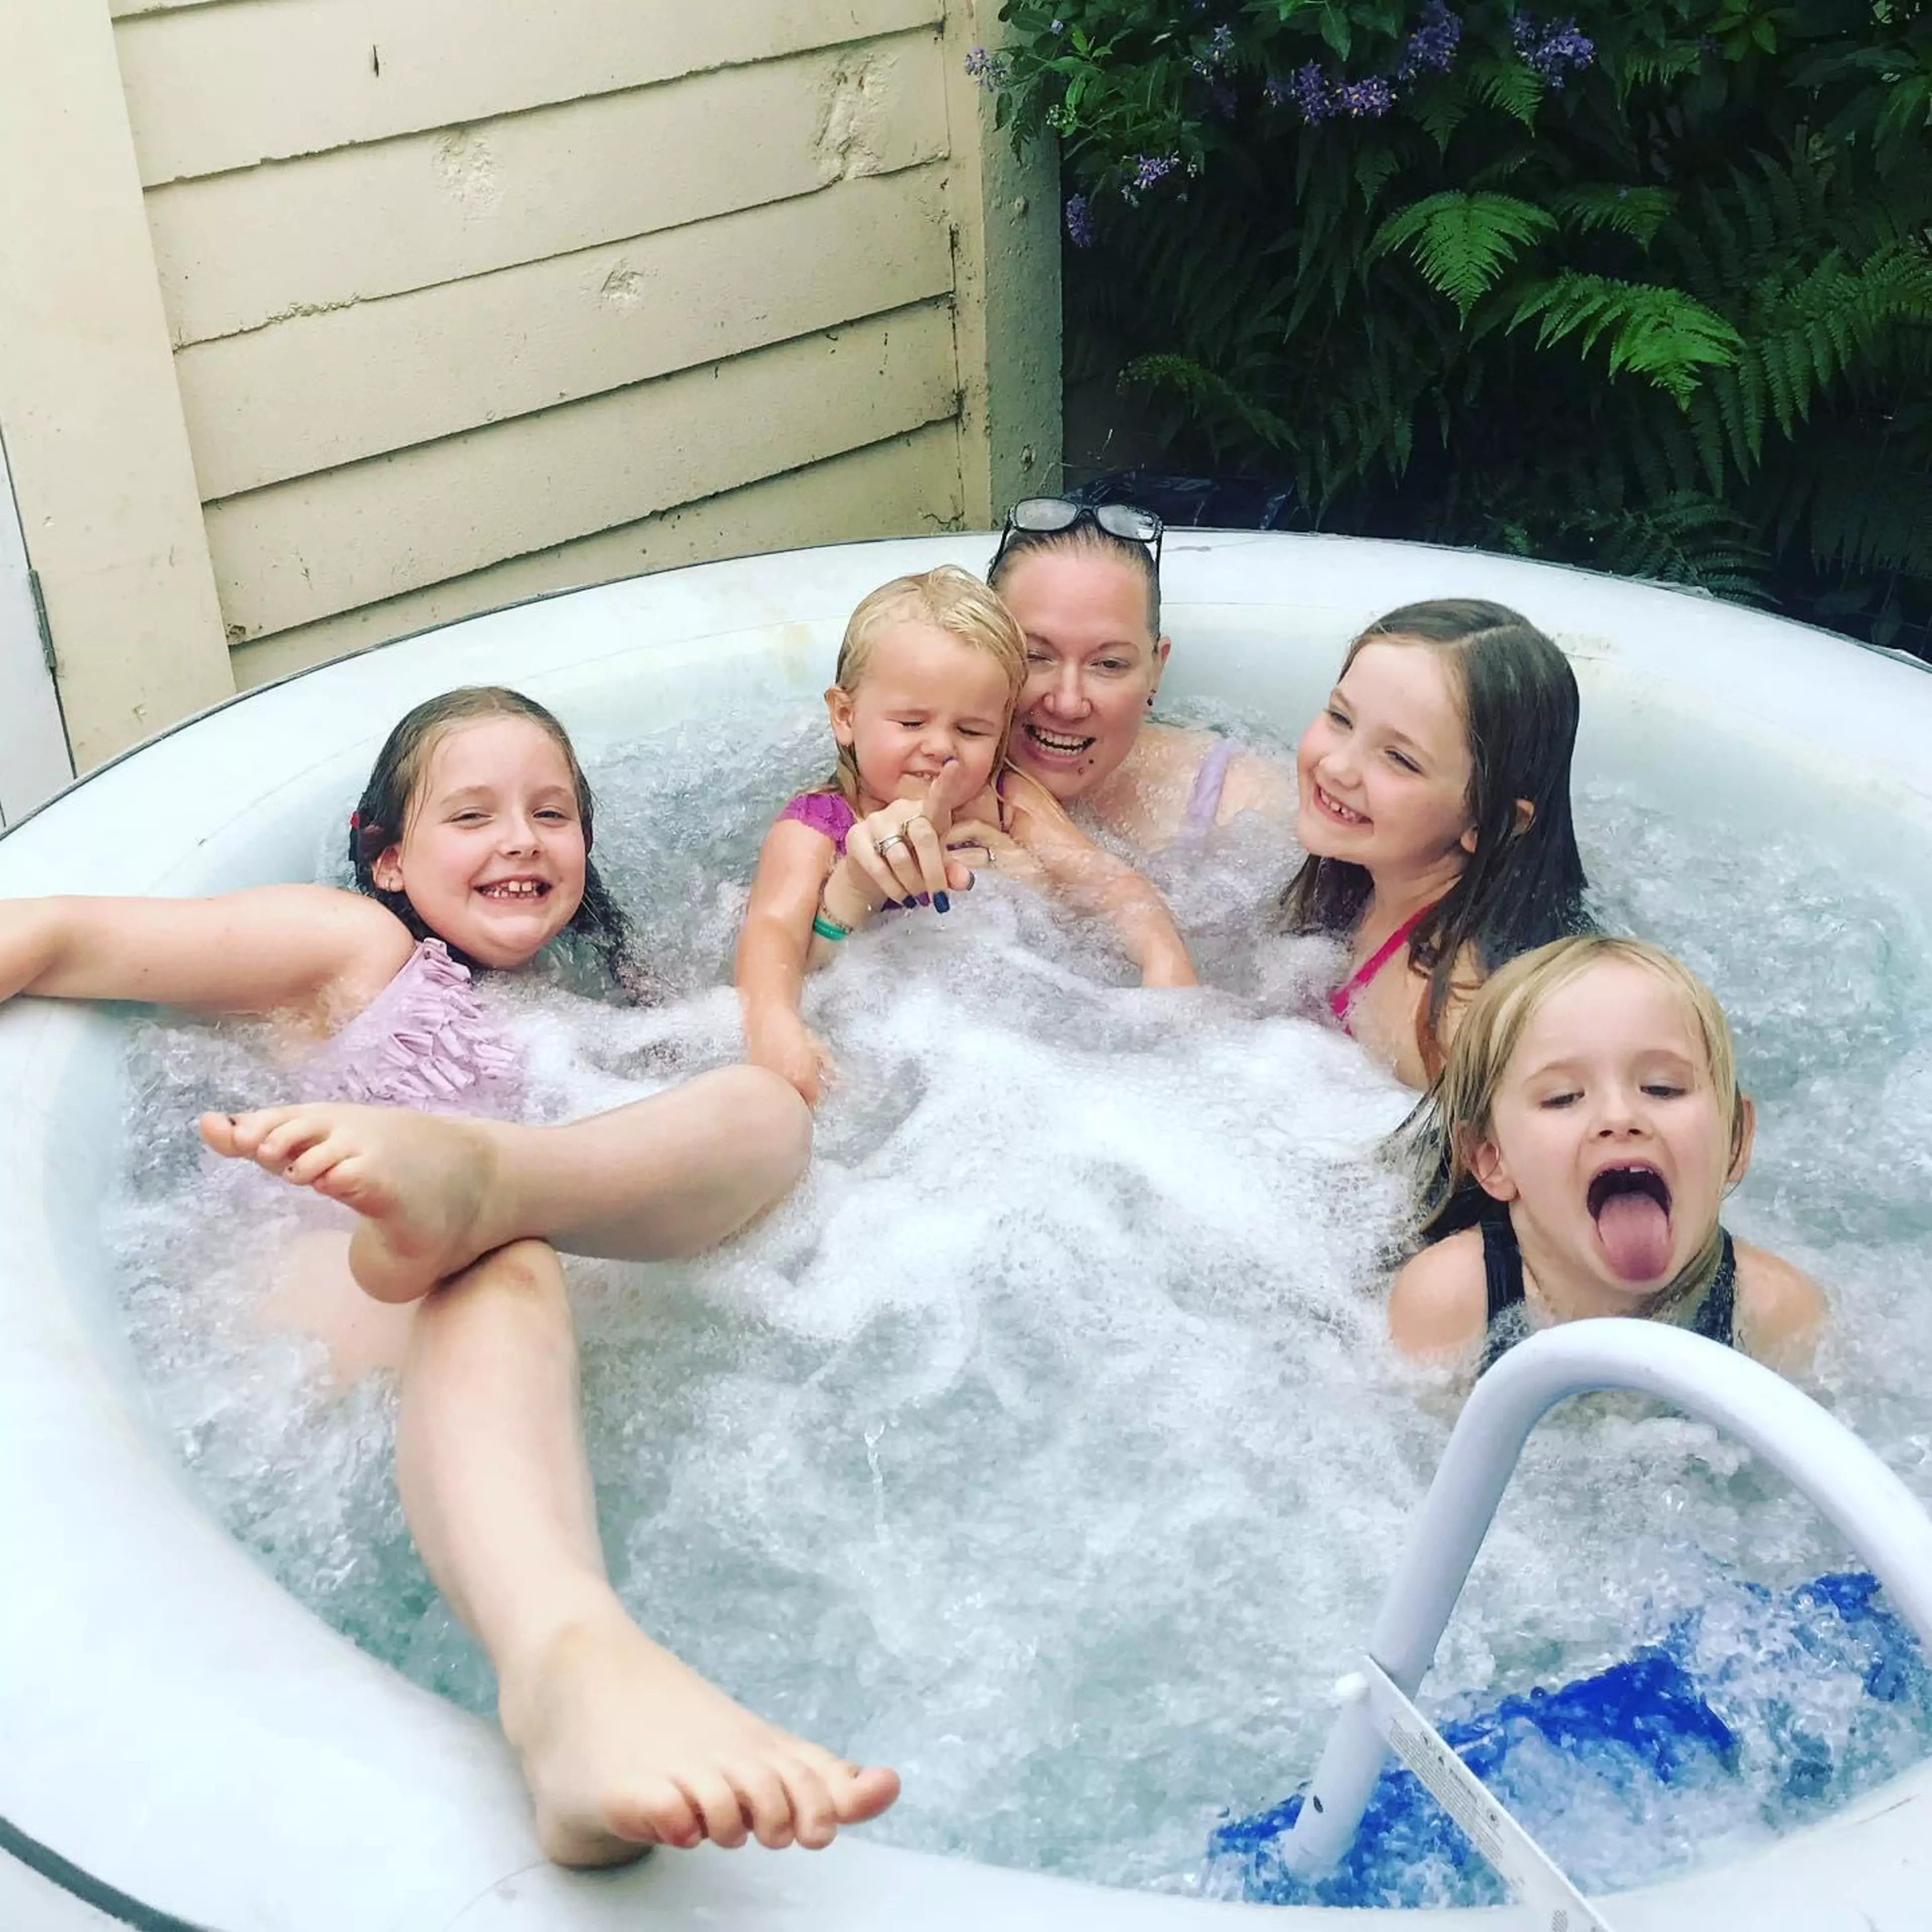 The family of six decided to use their hot tub during the warm weather (